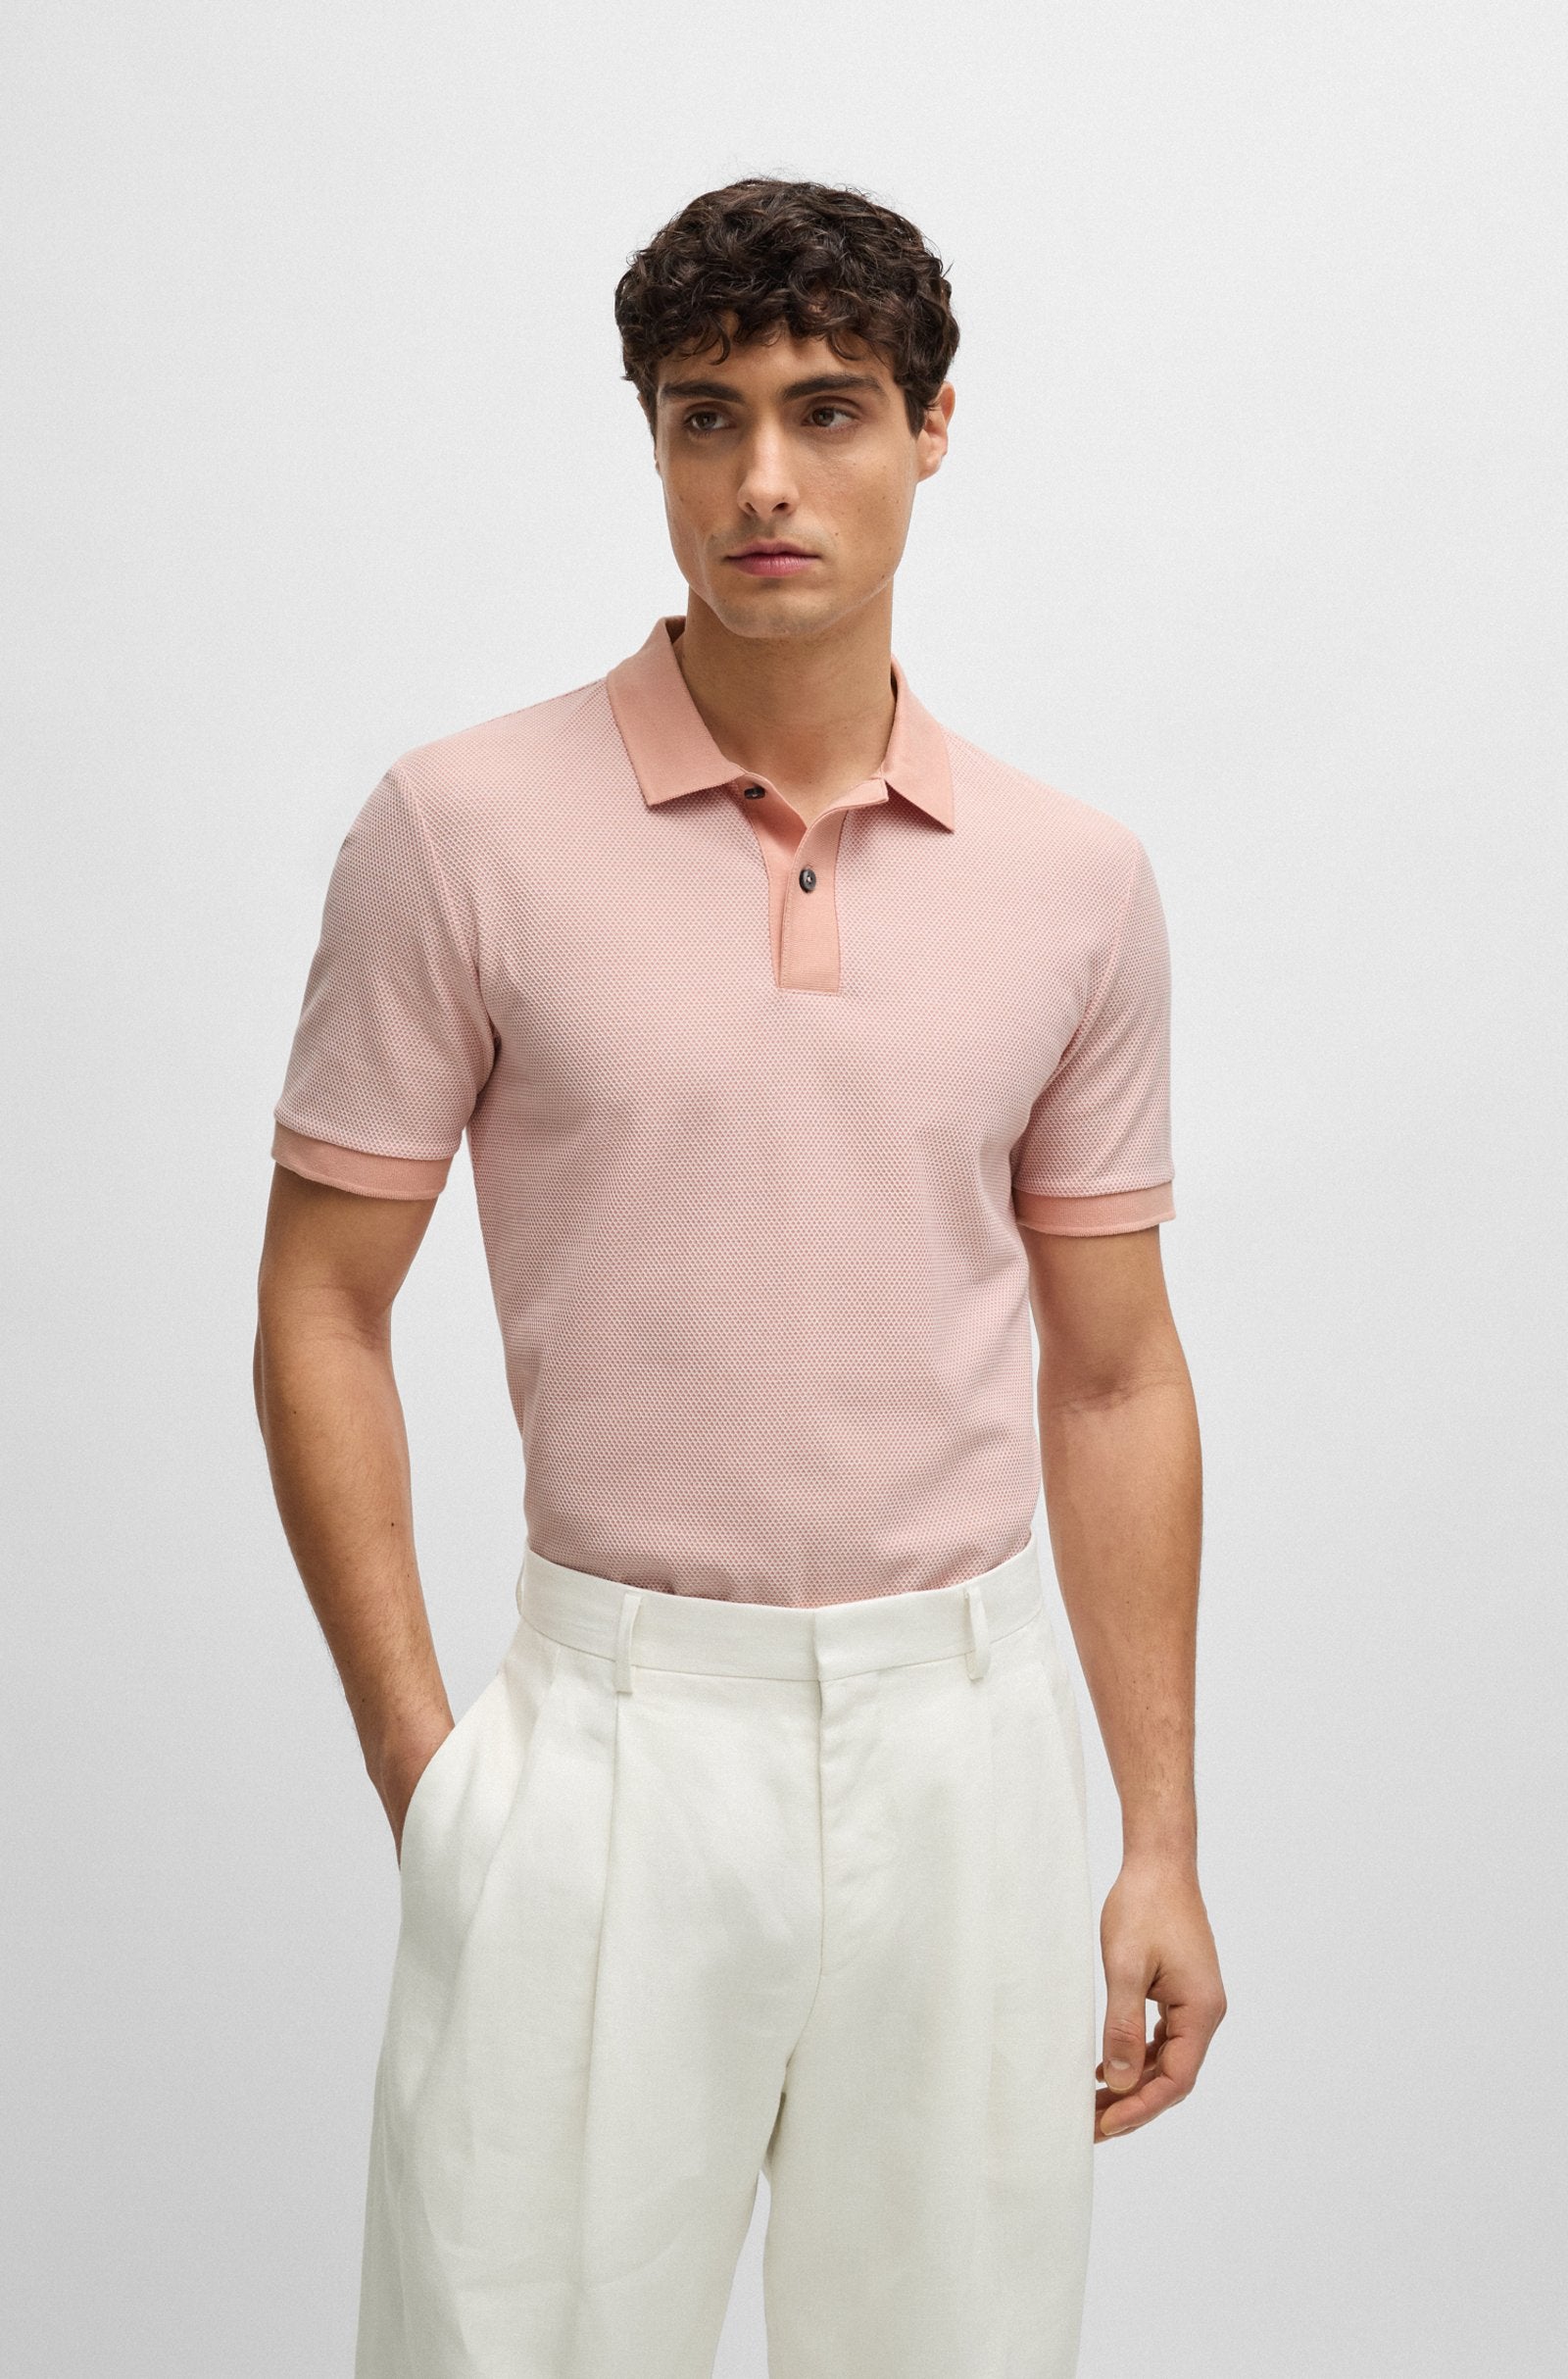 BOSS - PHILLIPSON 37 Light Pink SLIM FIT Two Tone Polo Shirt 50513580 699